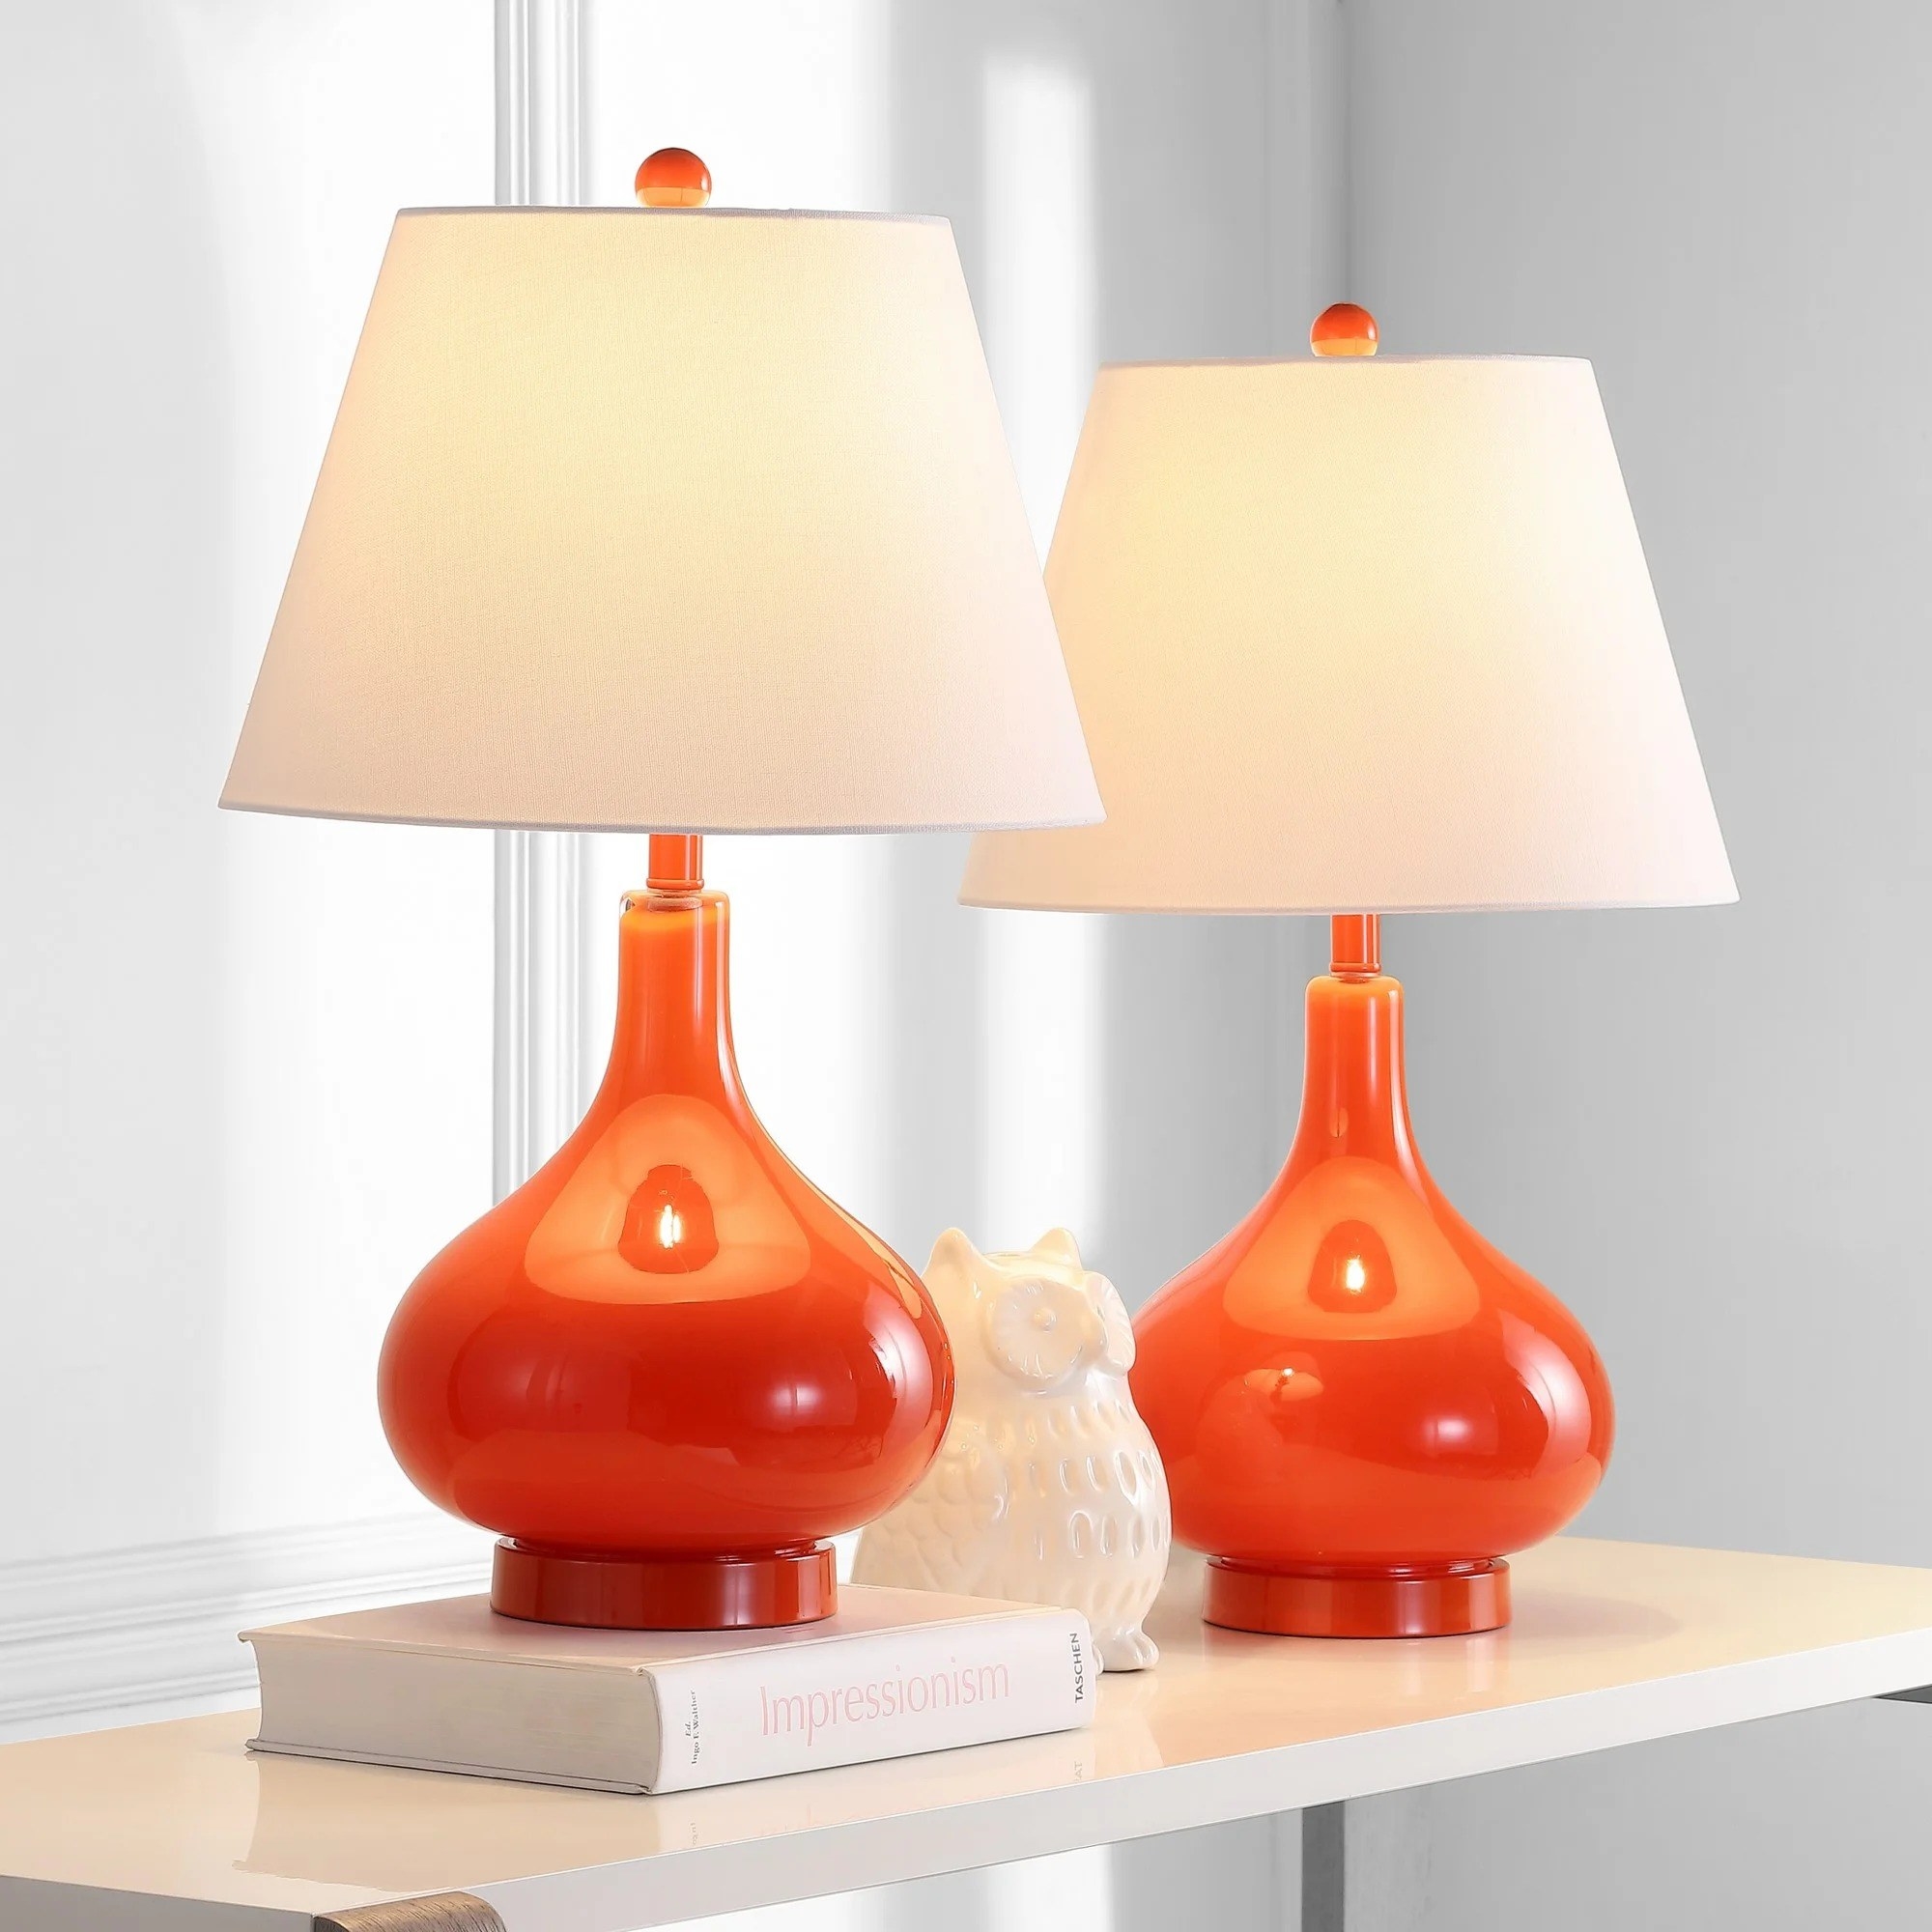 the two orange lamps